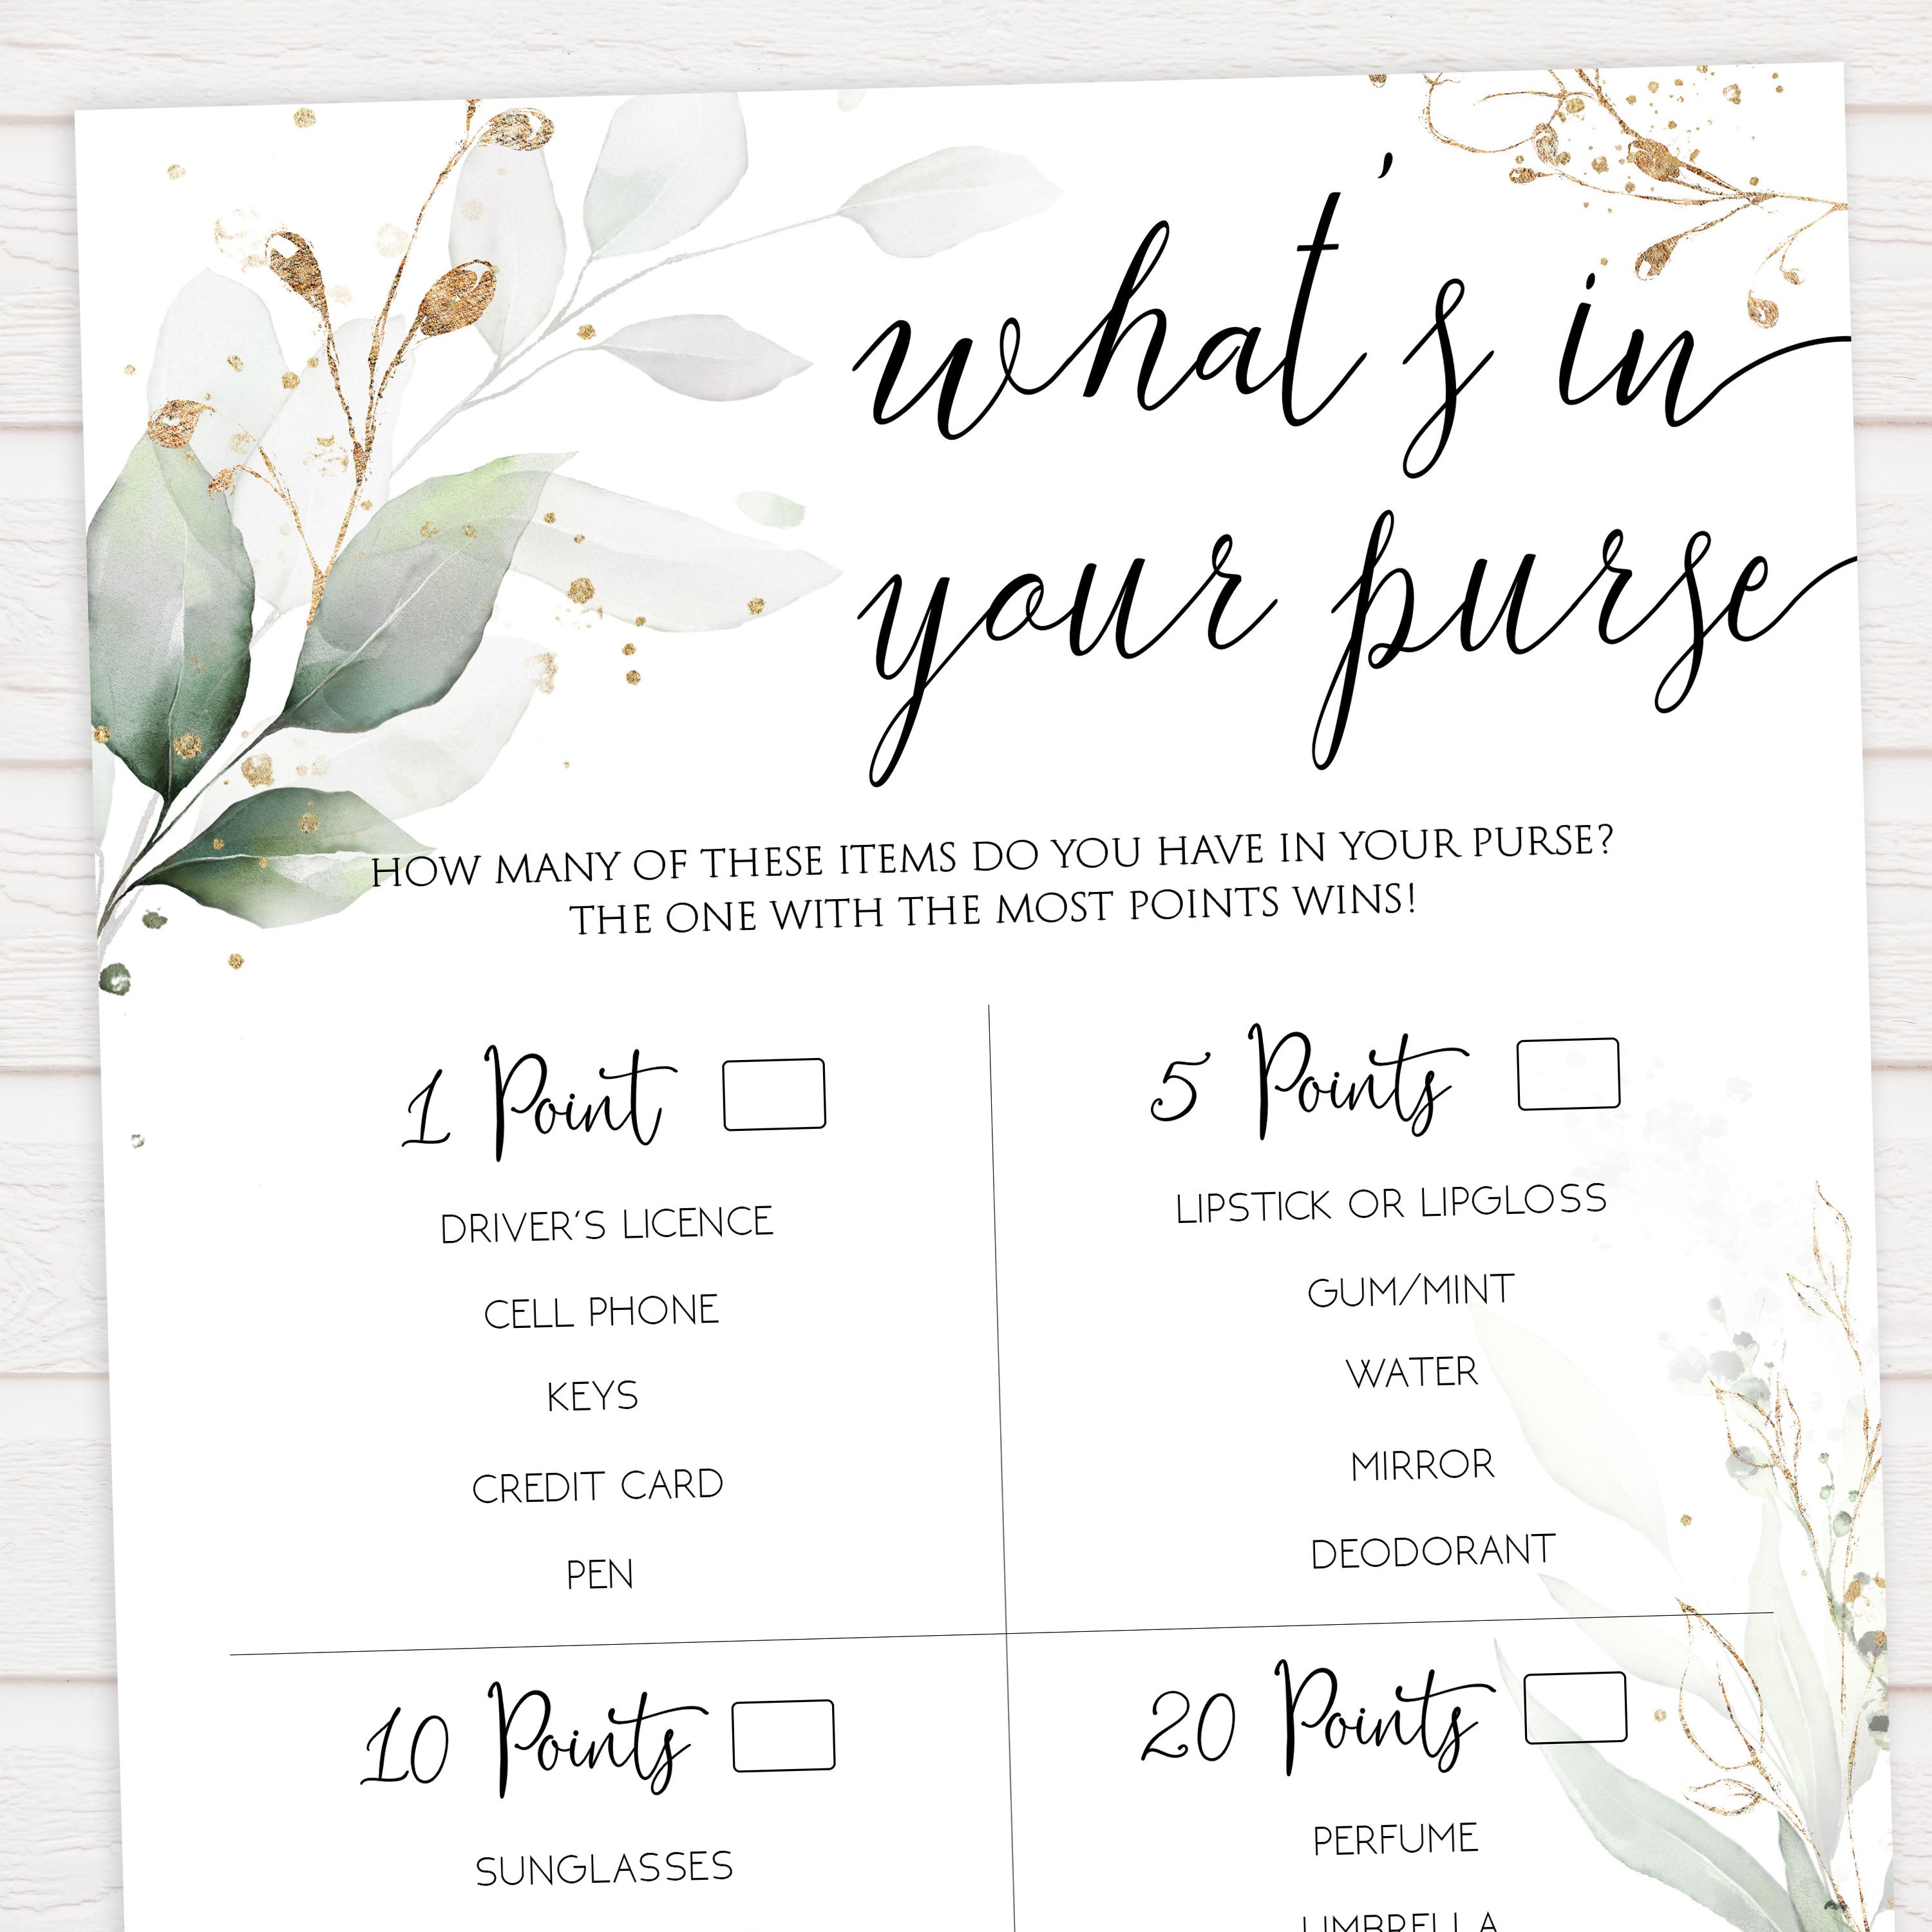 whats in your purse game, Printable bridal shower games, greenery bridal shower, gold leaf bridal shower games, fun bridal shower games, bridal shower game ideas, greenery bridal shower